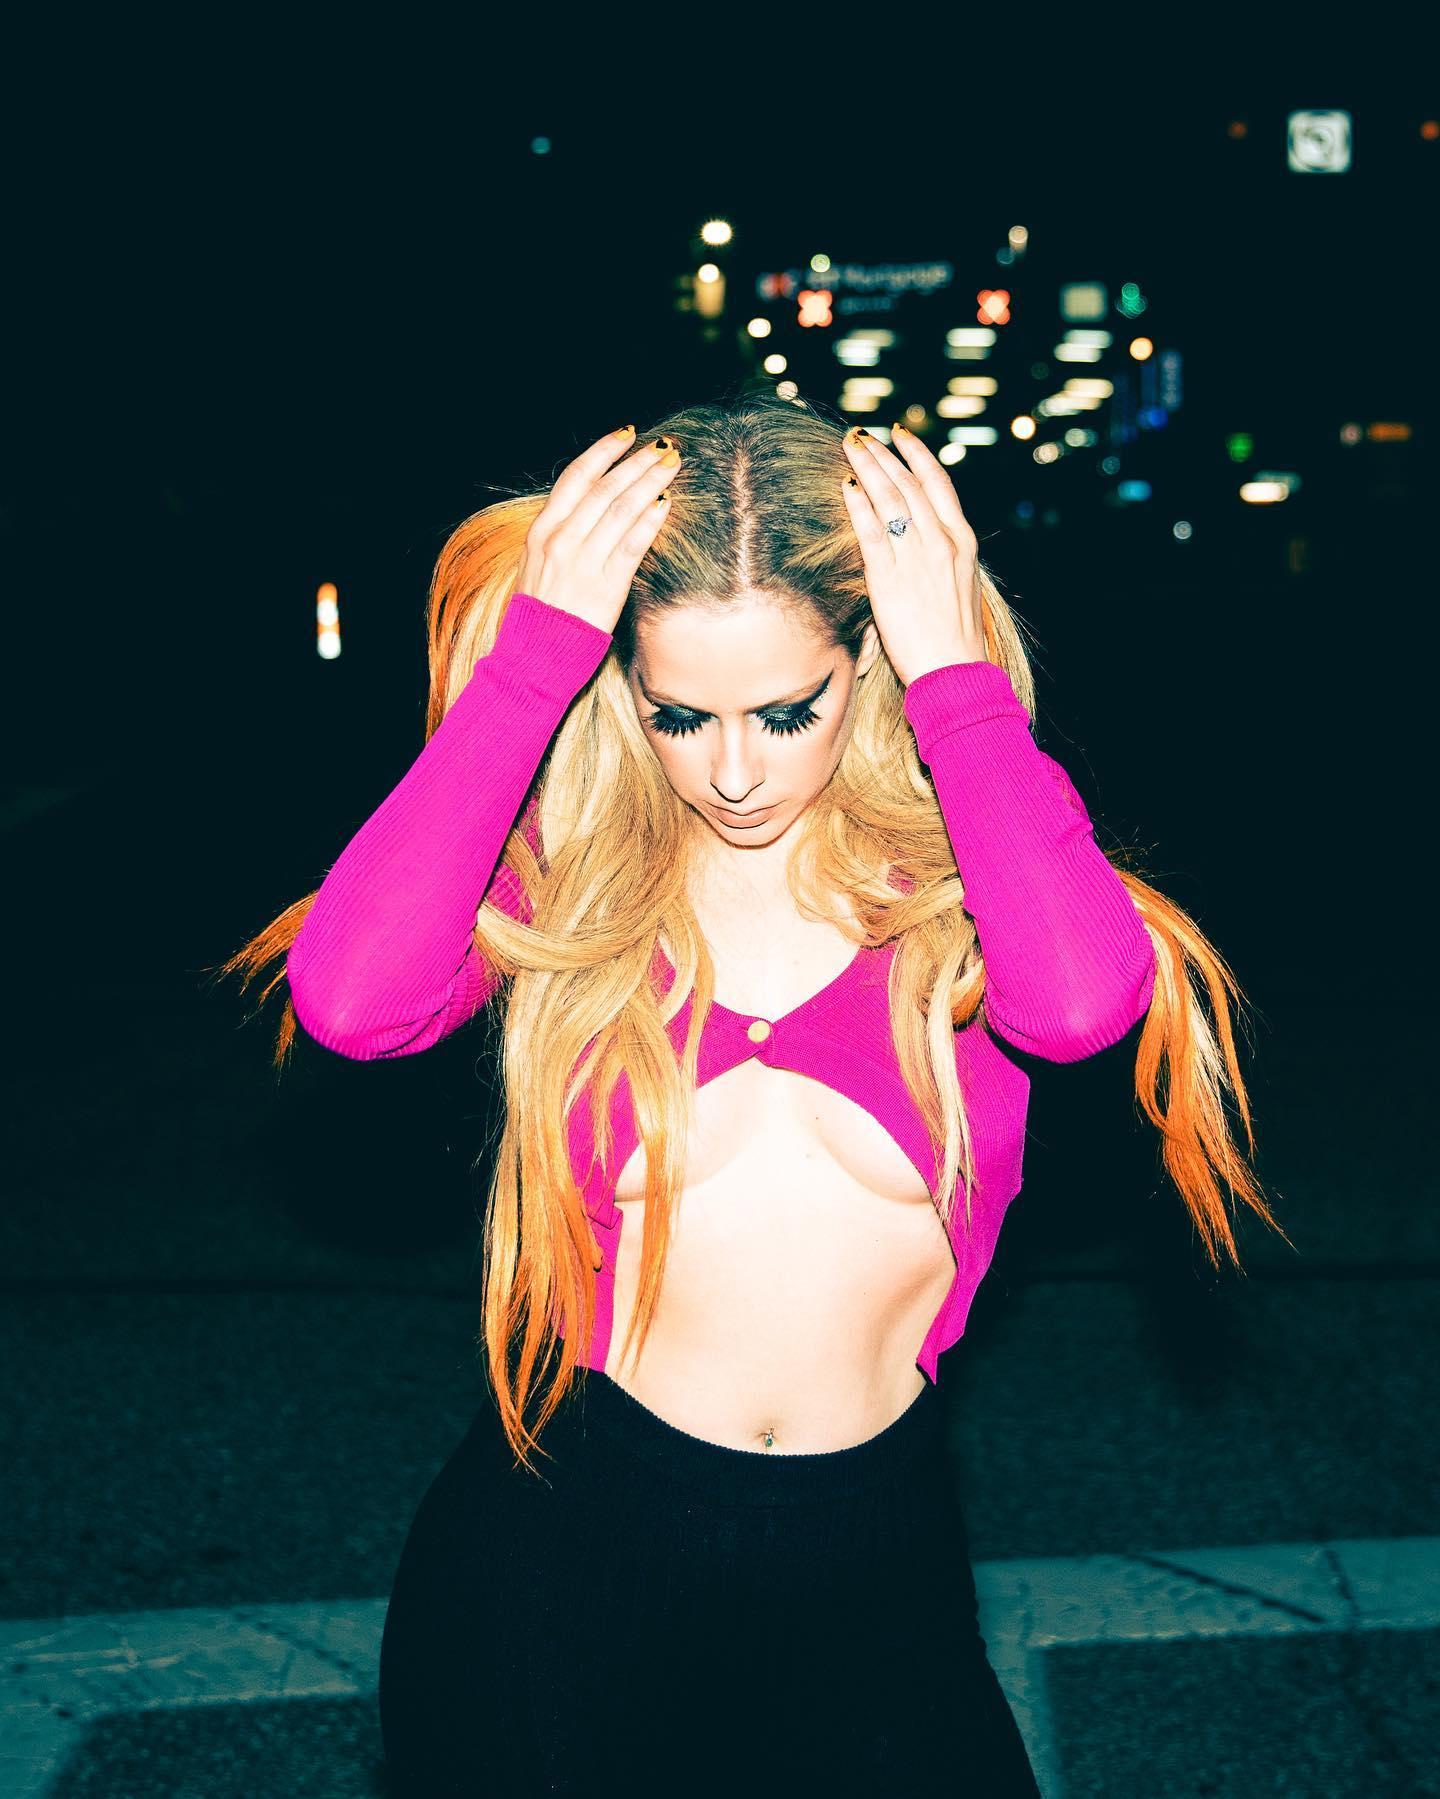 Avril Lavigne Puts Toned Abs On Display In Braless Pink Top